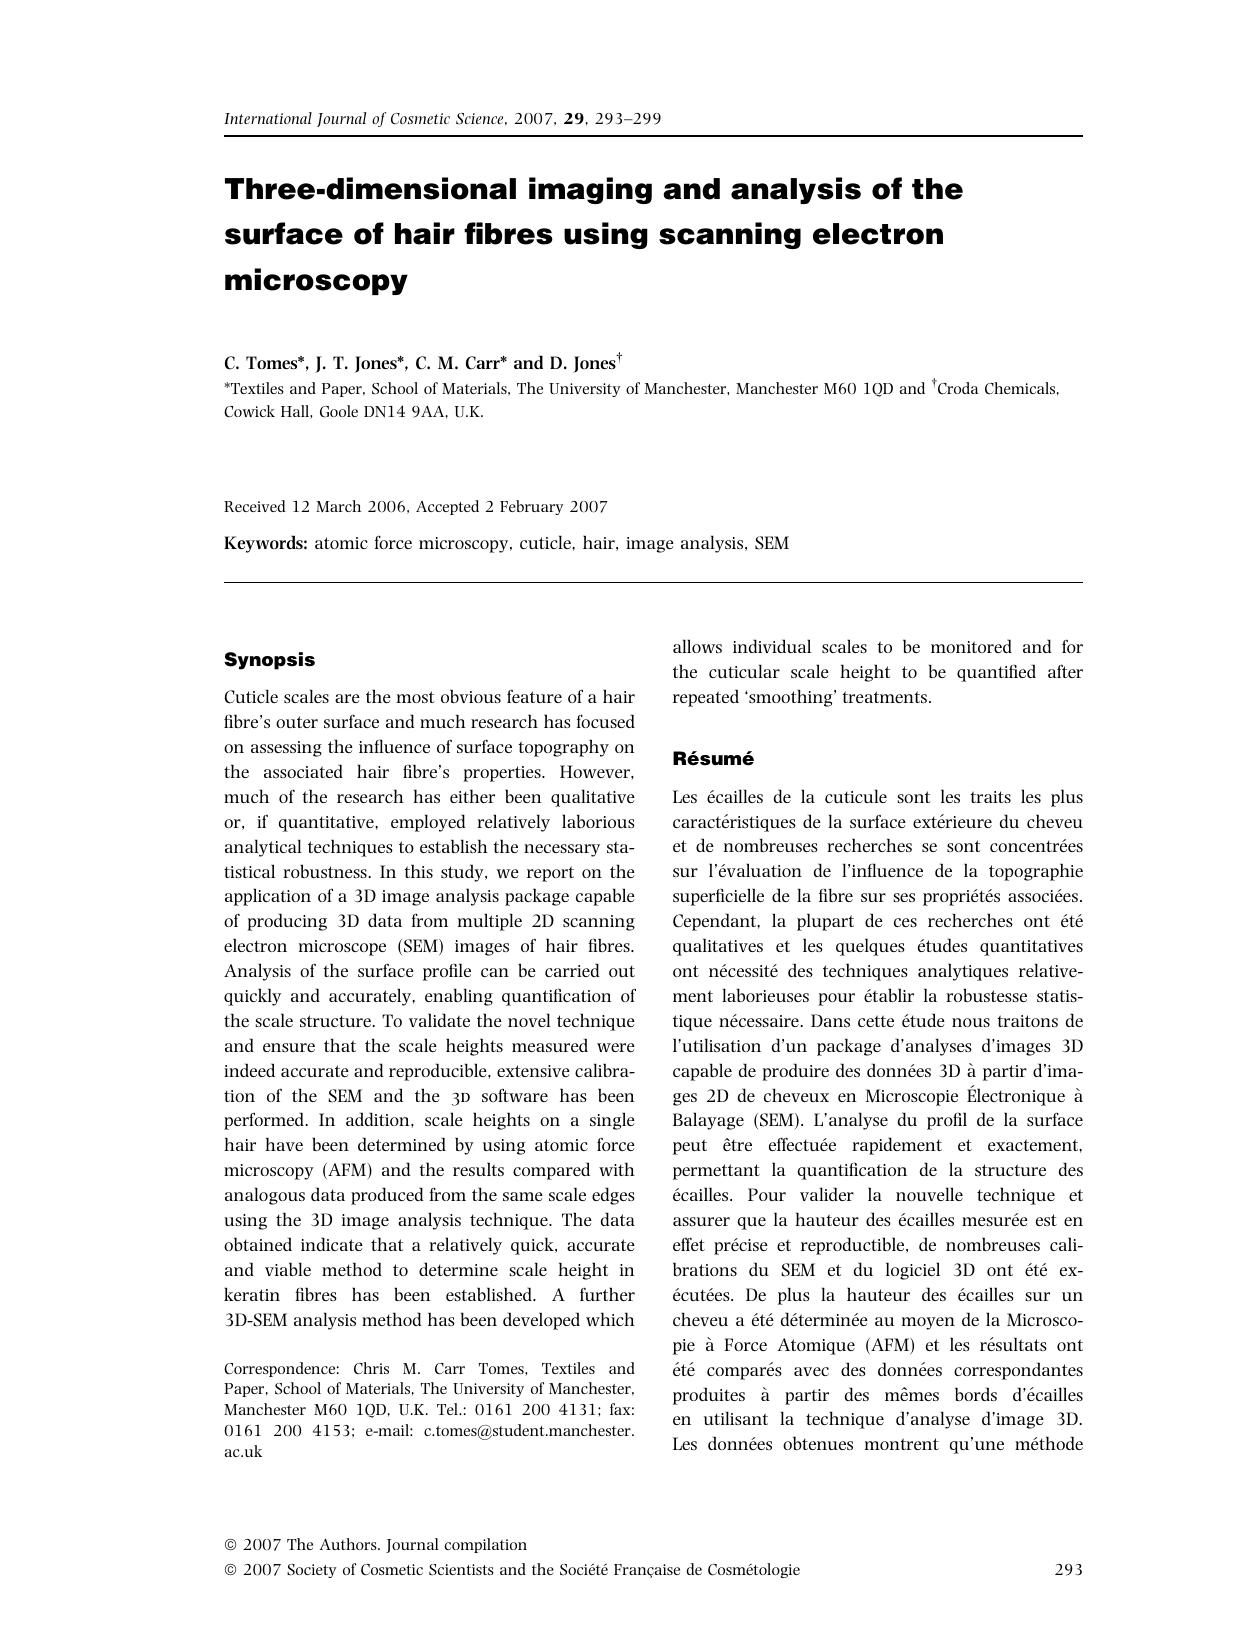 Three-dimensional imaging and analysis of the surface of hair fibres using scanning electron microscopy by Unknown